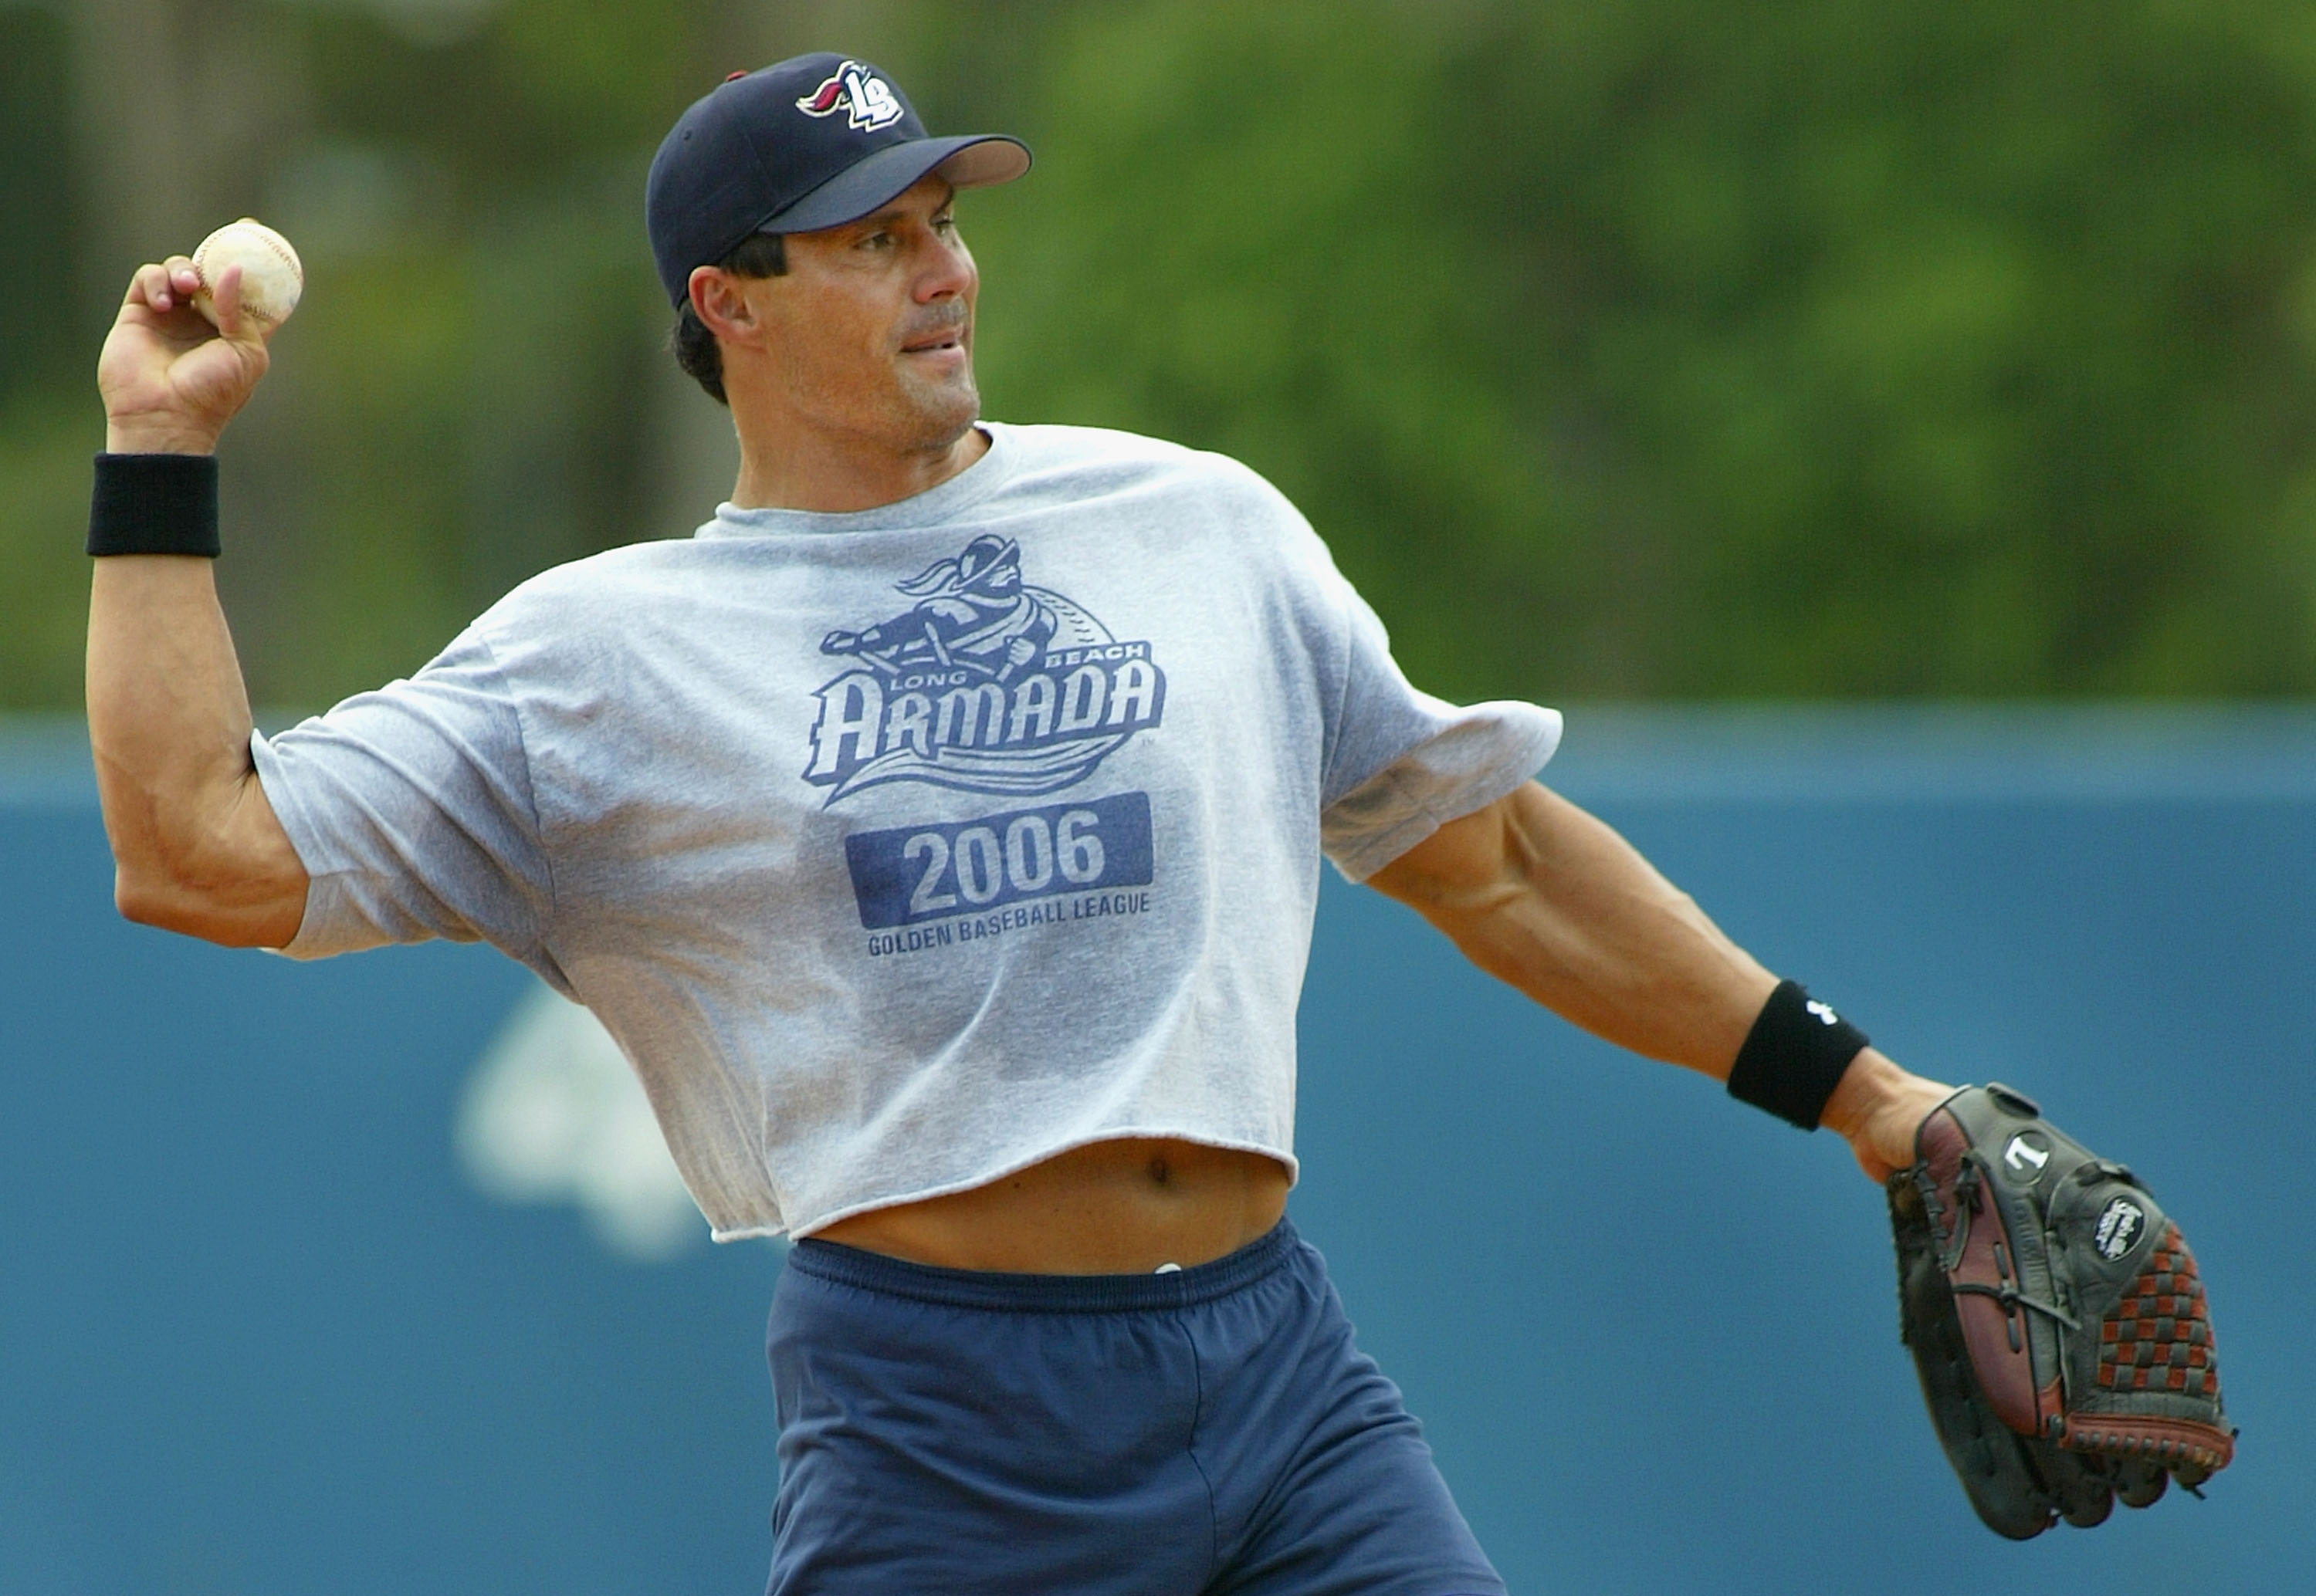 Jose Canseco: Life getting harder and harder for hitters